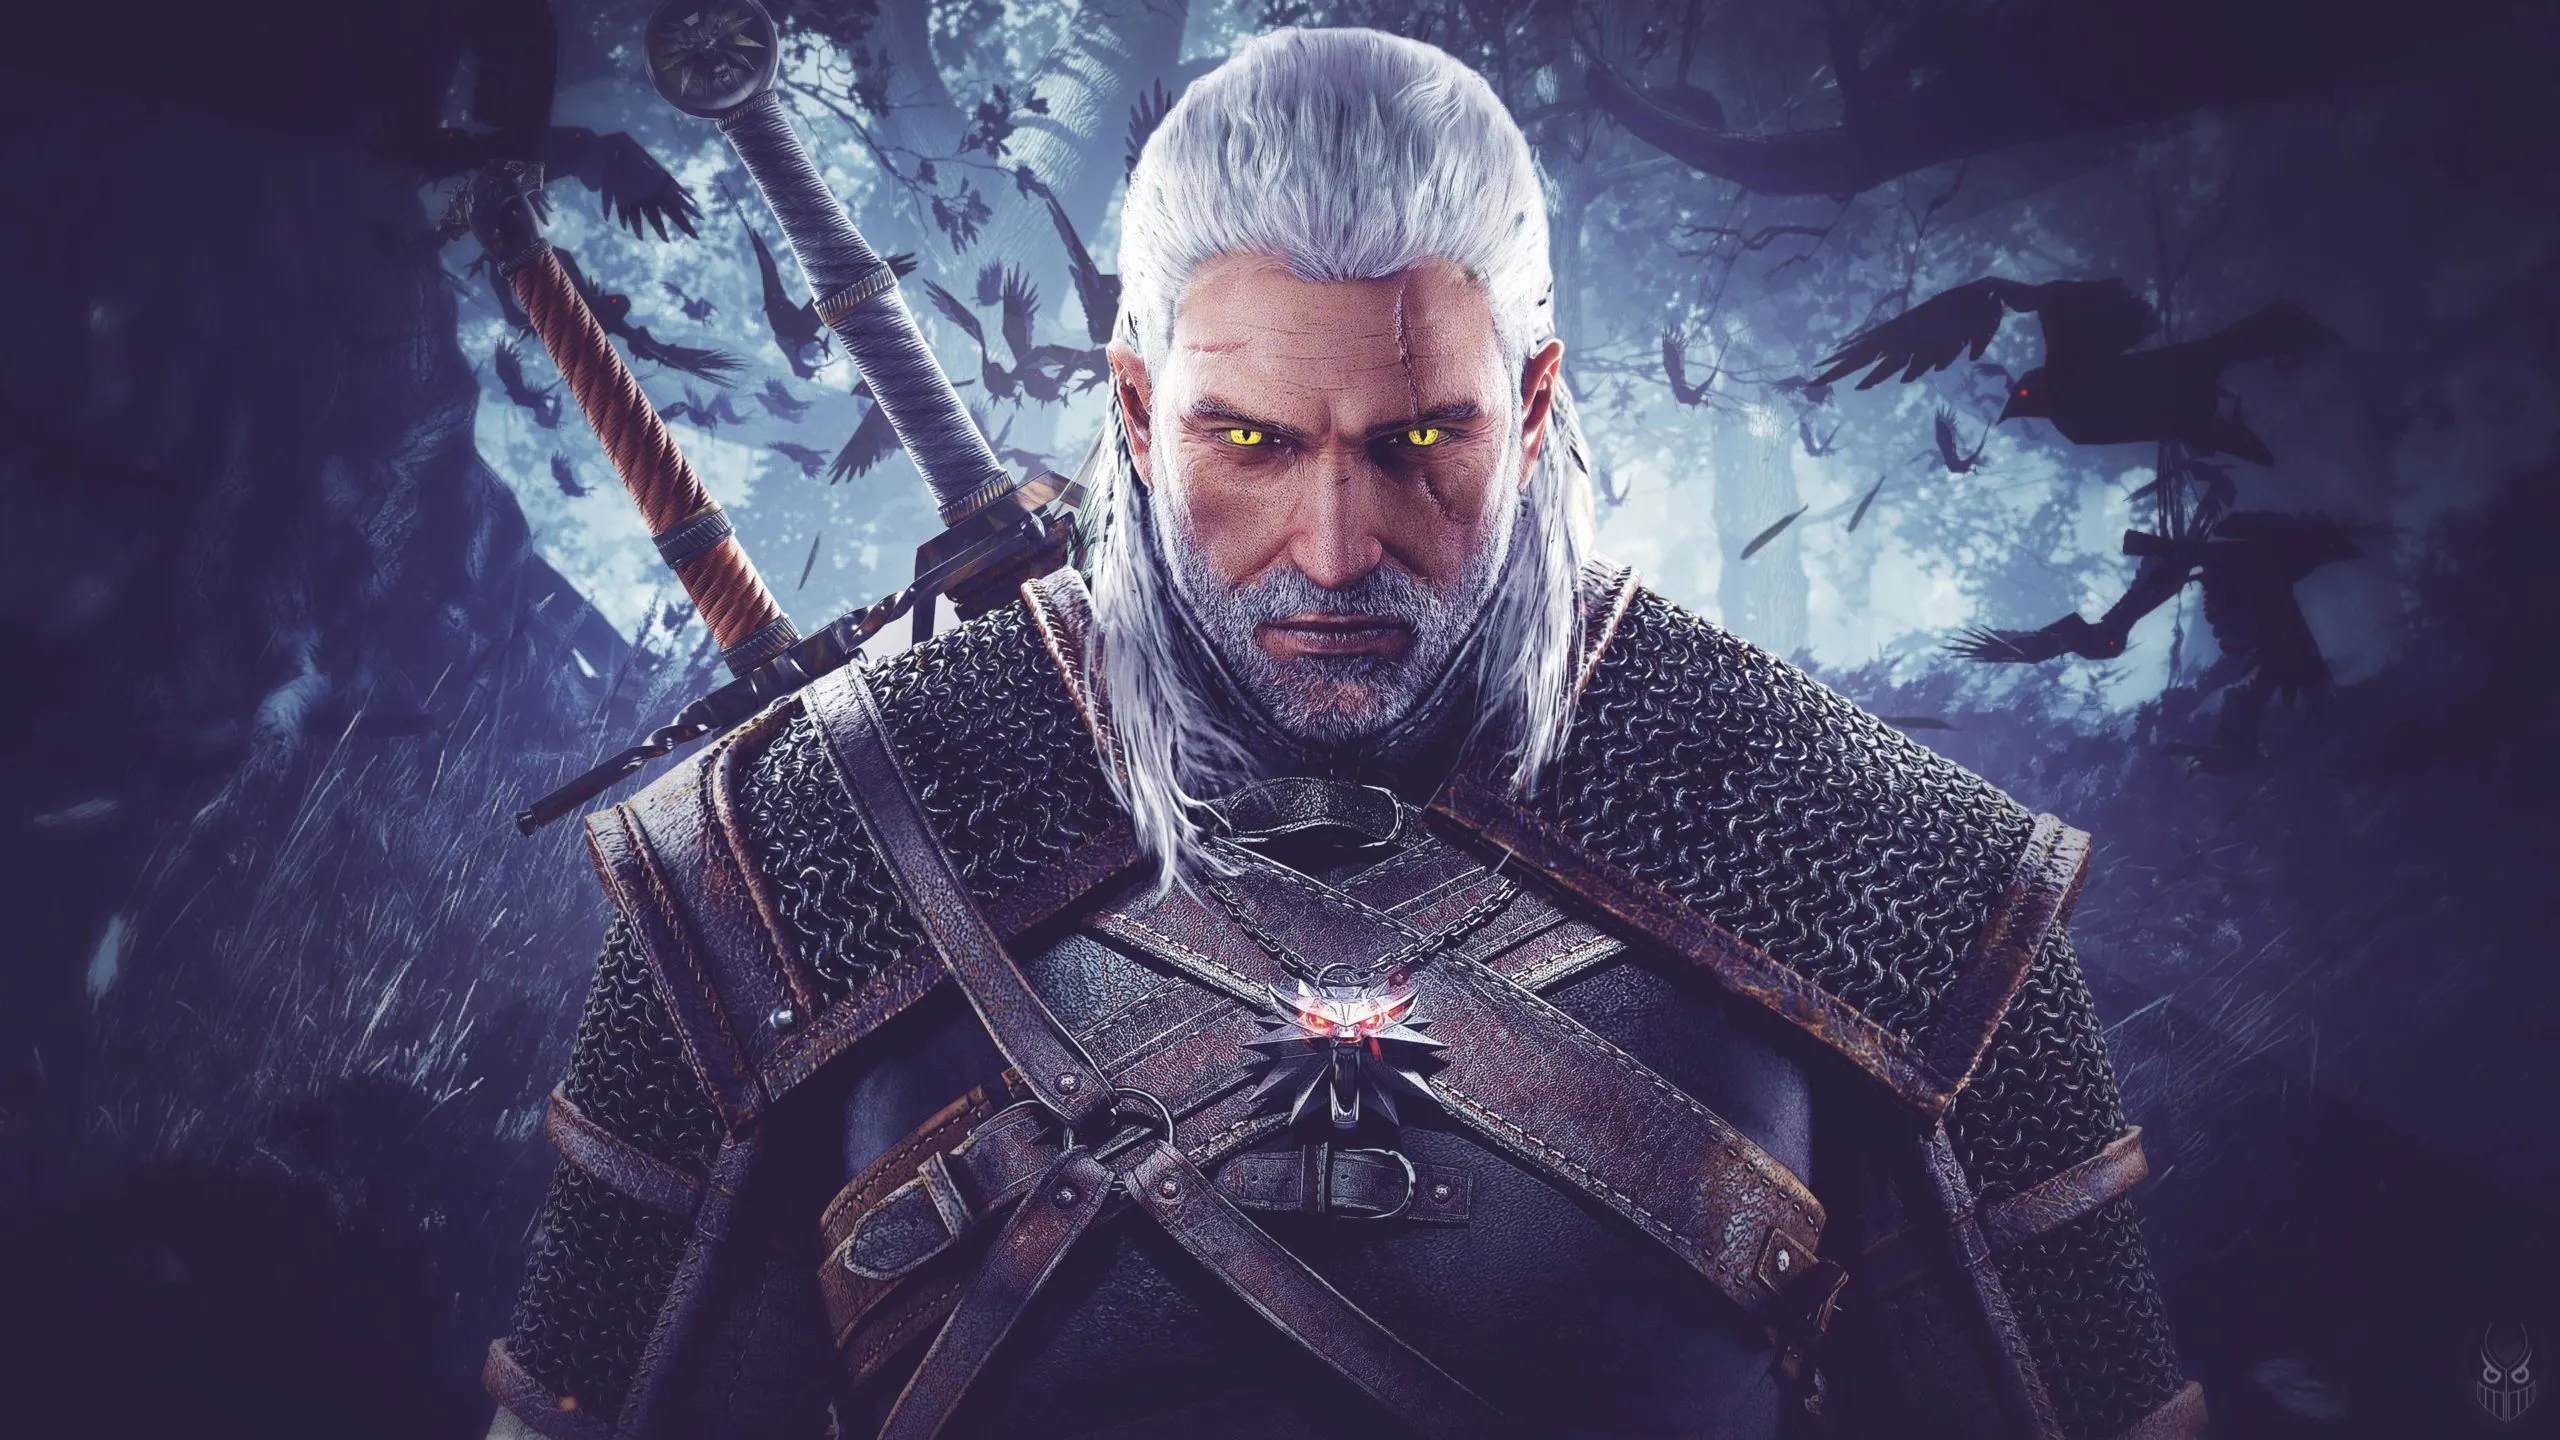 2560x1440 4k Witcher Wallpapers Desktop, Android and iPhone Page 2 of 2 The RamenSwag